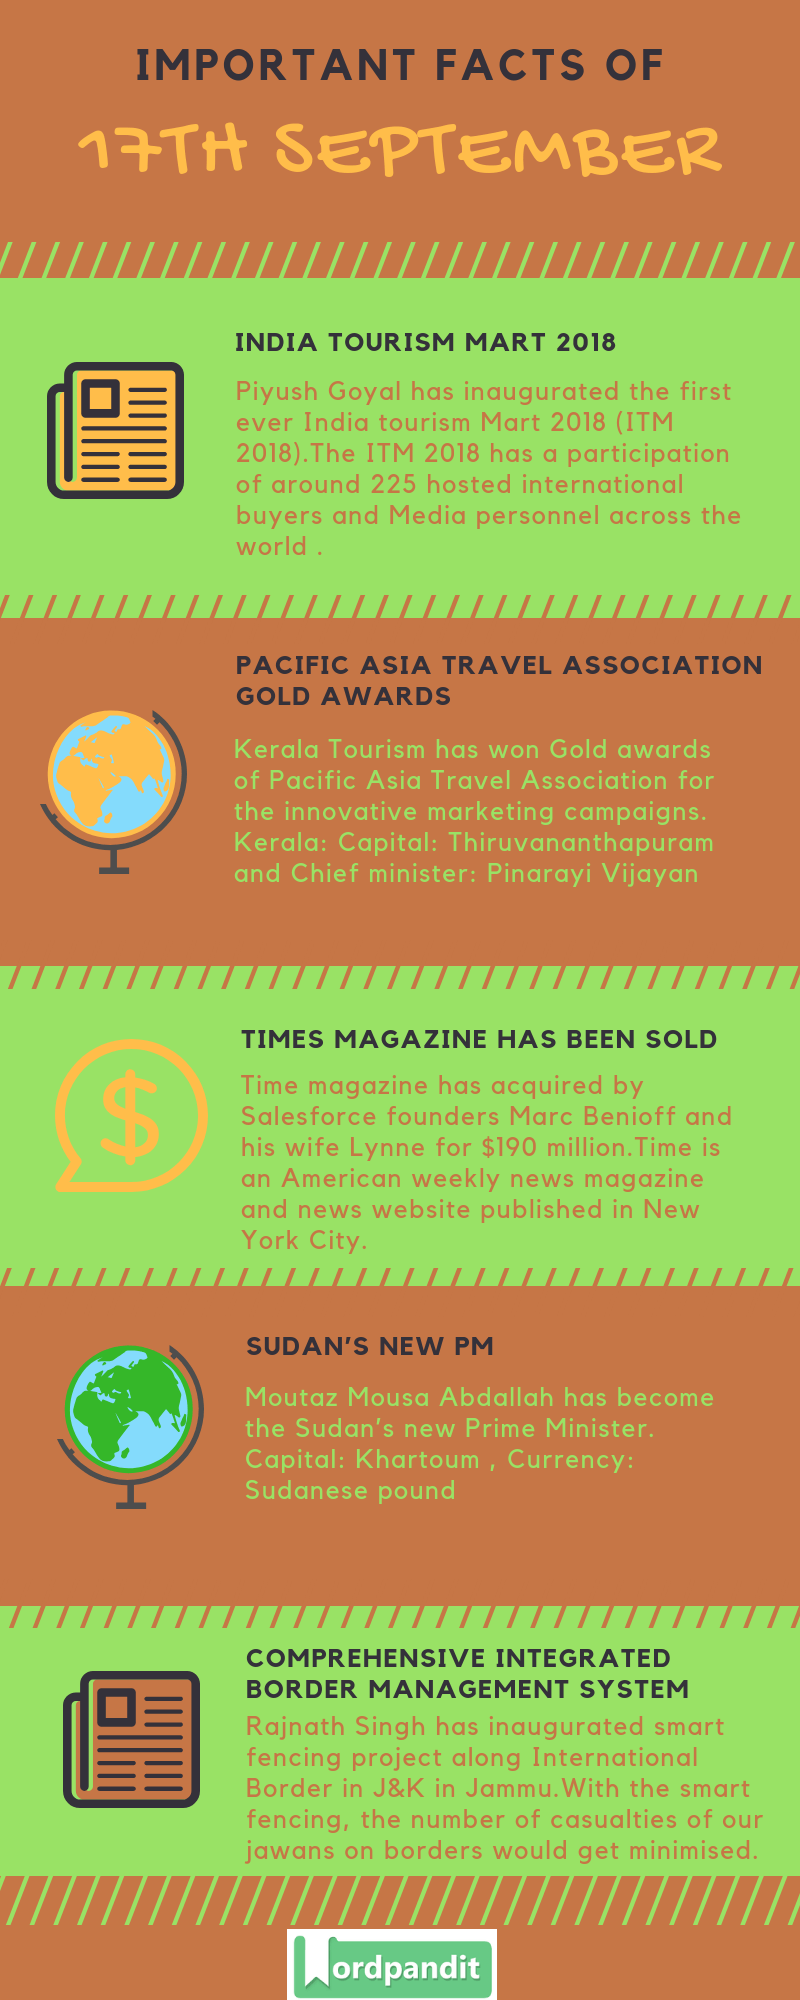 Daily Current Affairs 17 September 2018 Current Affairs Quiz 17 September 2018 Current Affairs Infographic